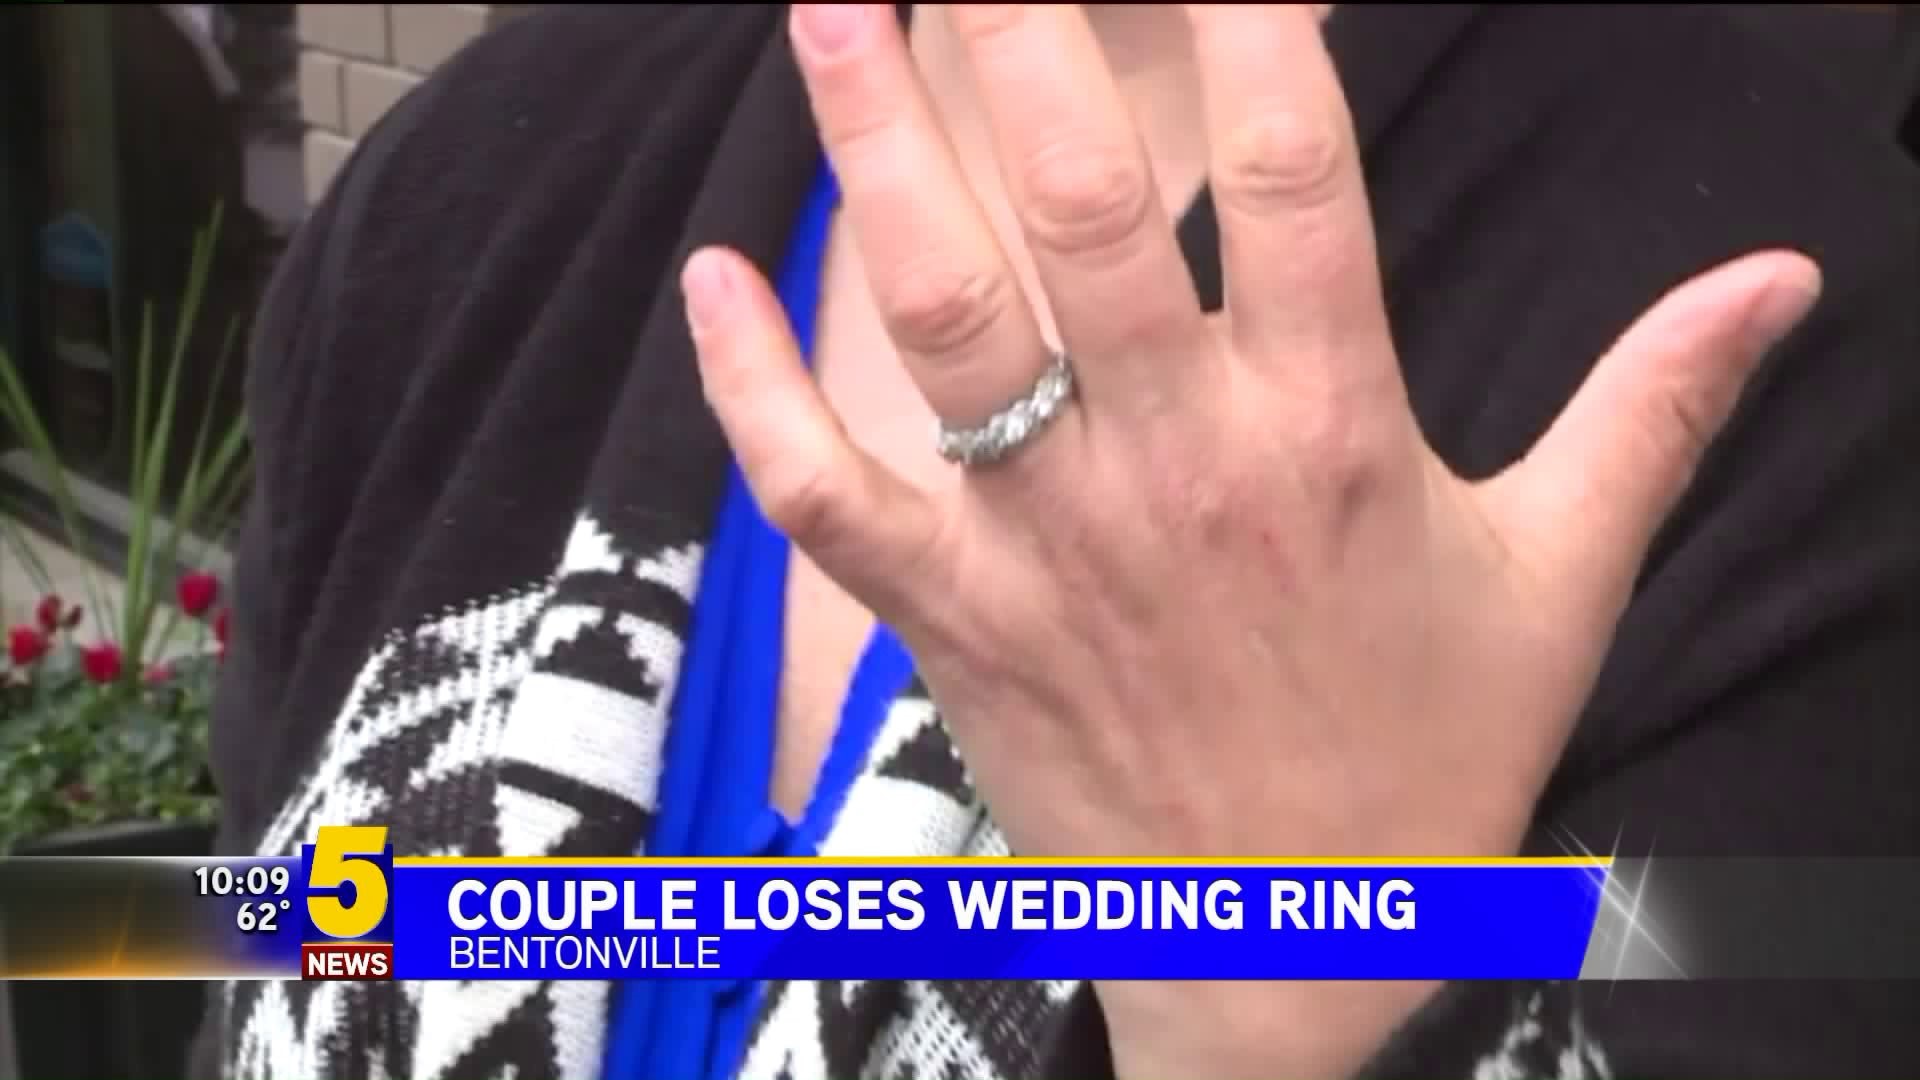 Couple Loses Wedding Ring, Construction Worker Finds It